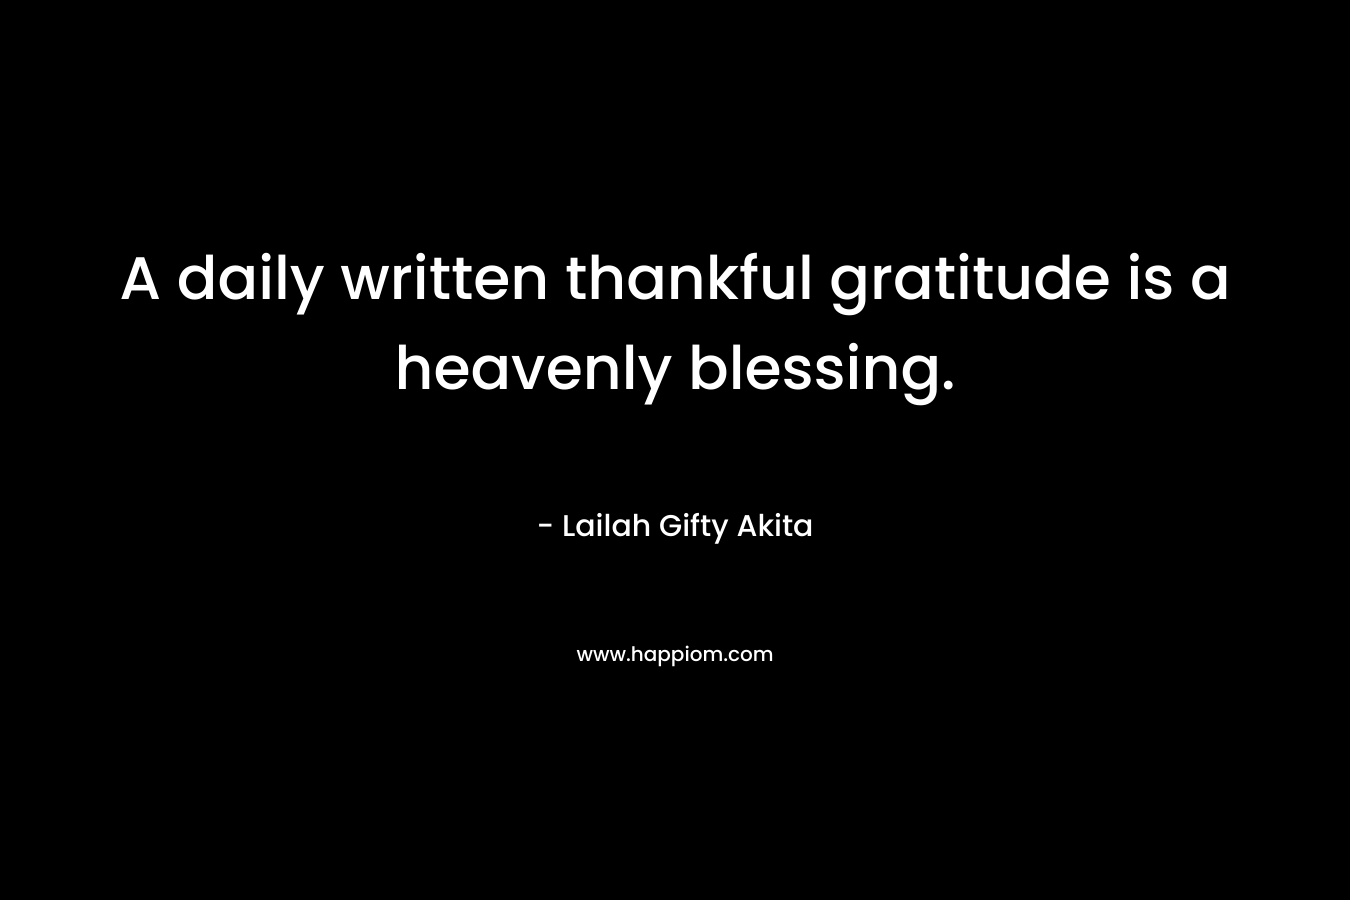 A daily written thankful gratitude is a heavenly blessing. – Lailah Gifty Akita